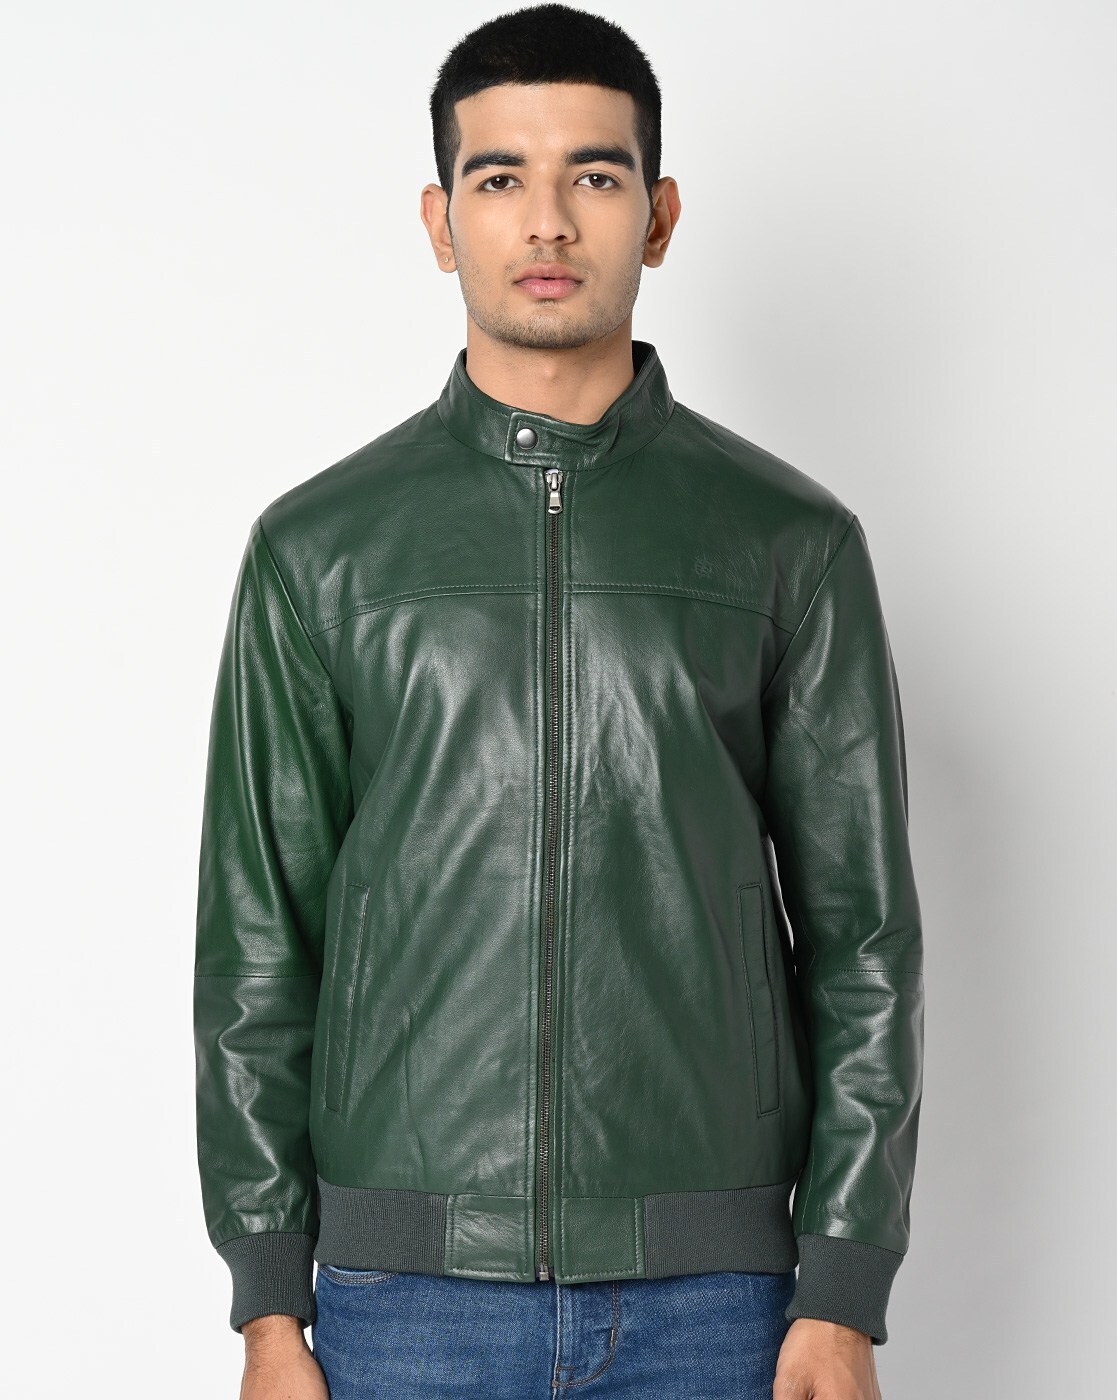 Cooper Army Olive Green Leather MA-1 Bomber Jacket